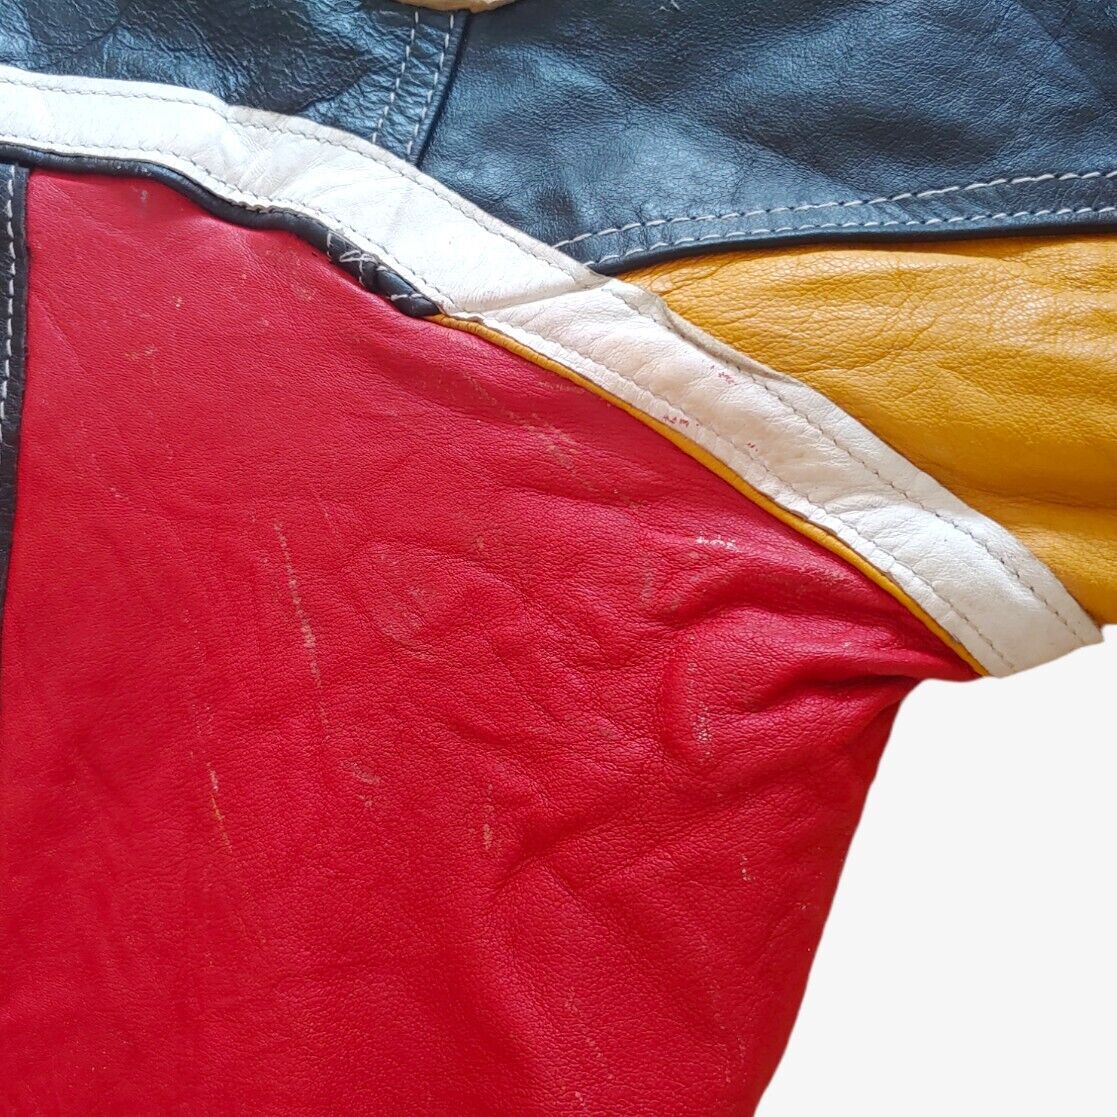 Vintage 90s Baseball Embroidered Spell Out Colourful Leather Varsity Jacket With Big Back Motif Marks - Casspios Dream